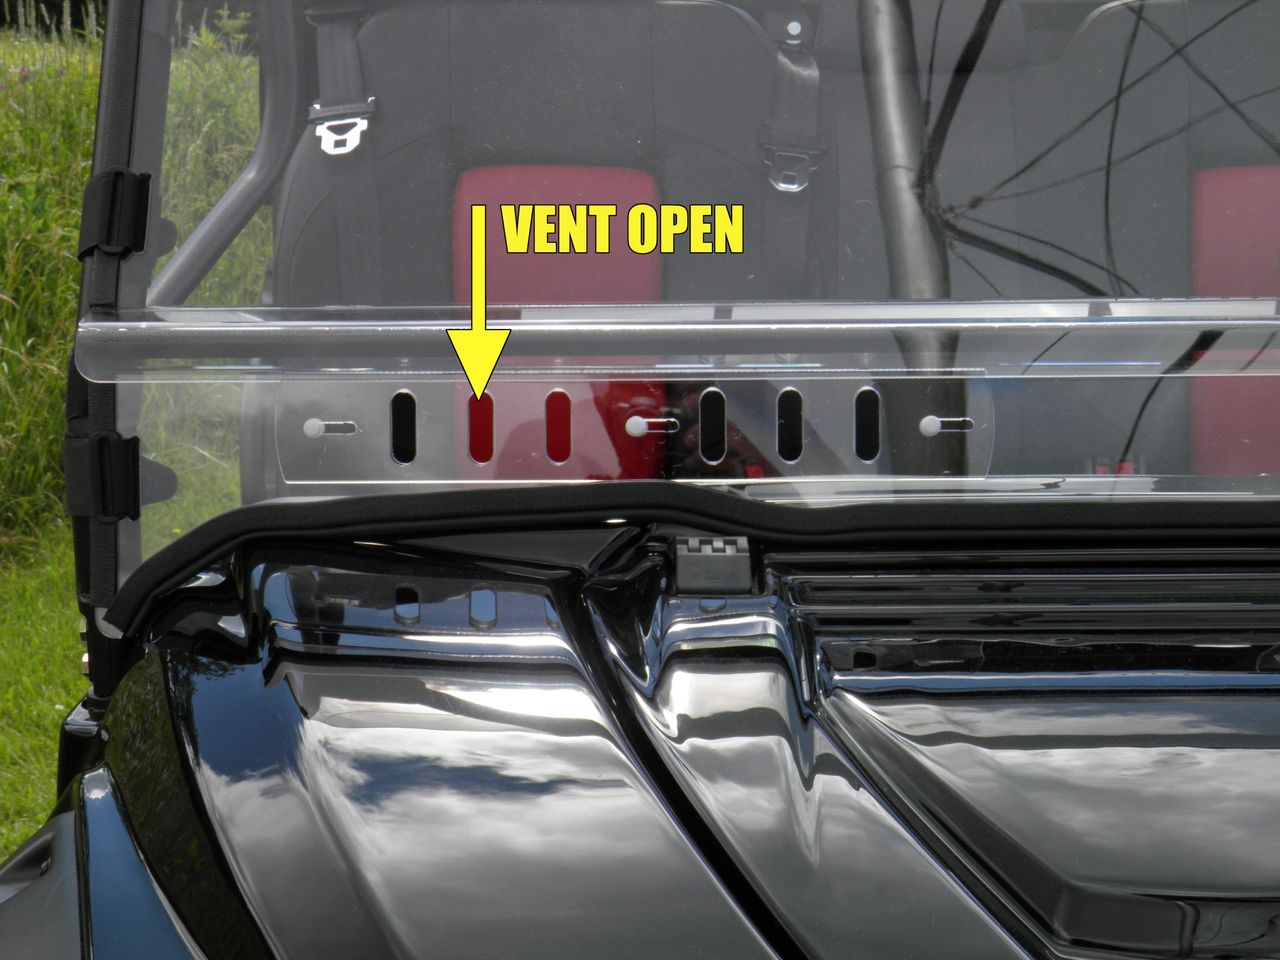 3 Star side x side can-am commander windshield vents open